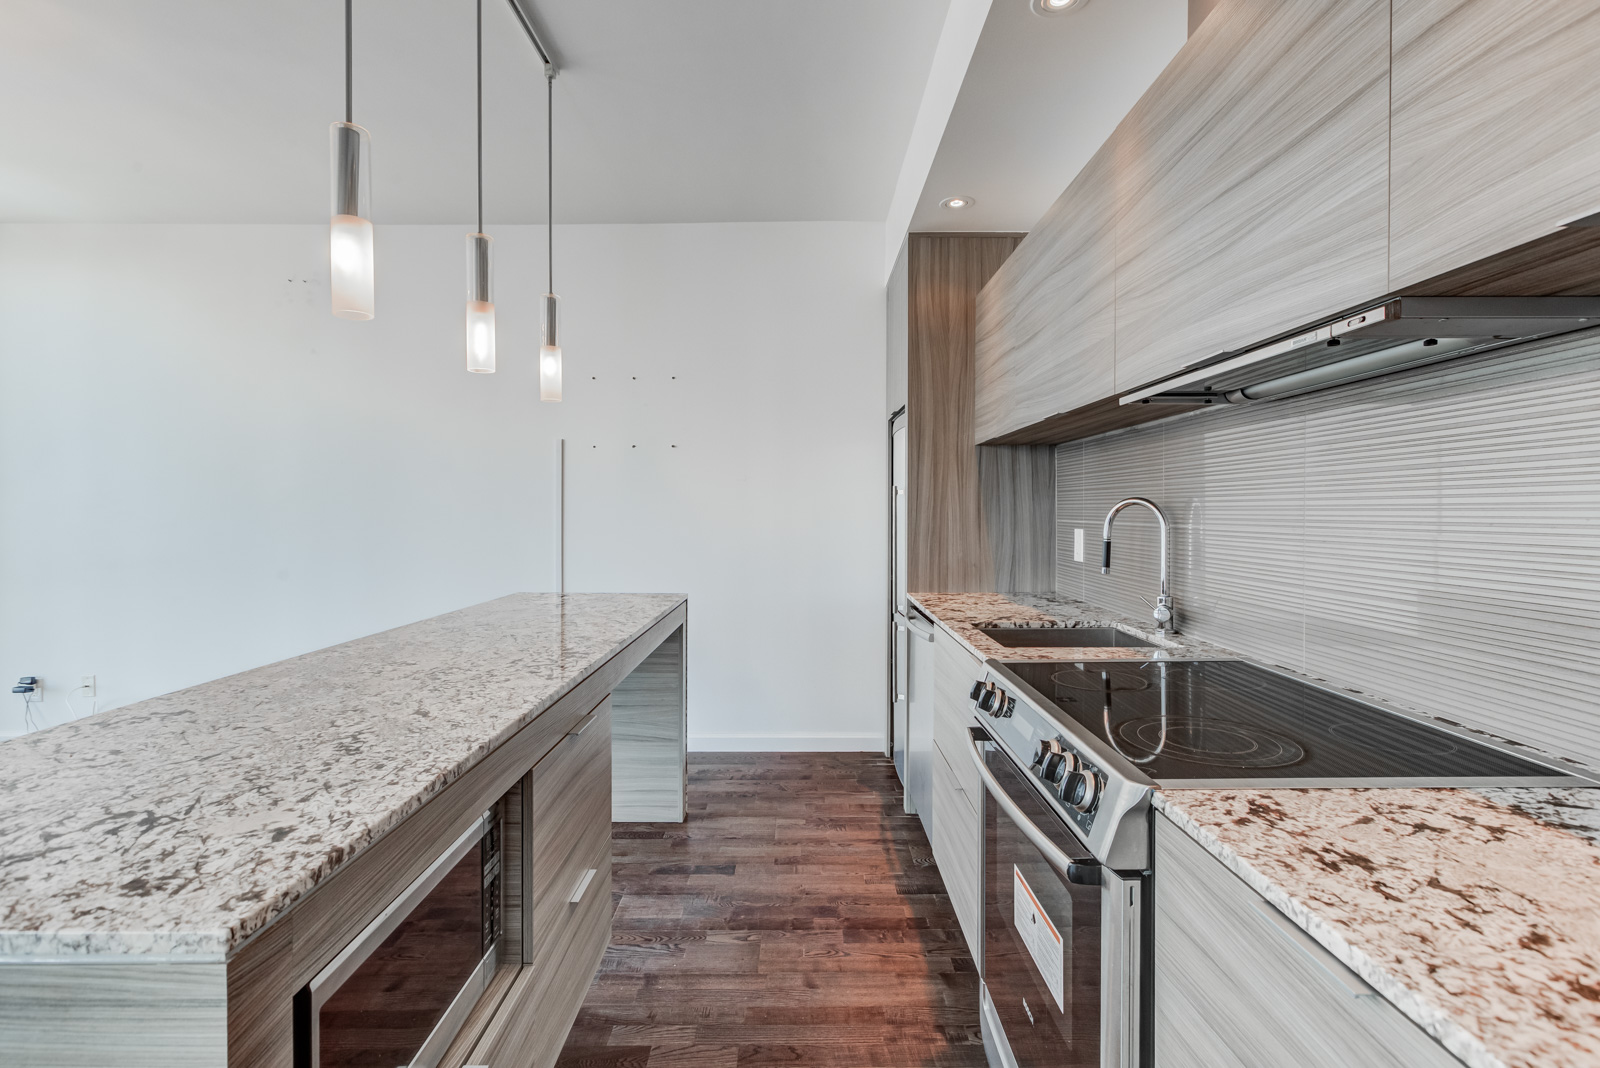 Heavily-textured kitchen with marble counters, laminate floors, stainless steel appliances, wooden cabinets and hanging lights.